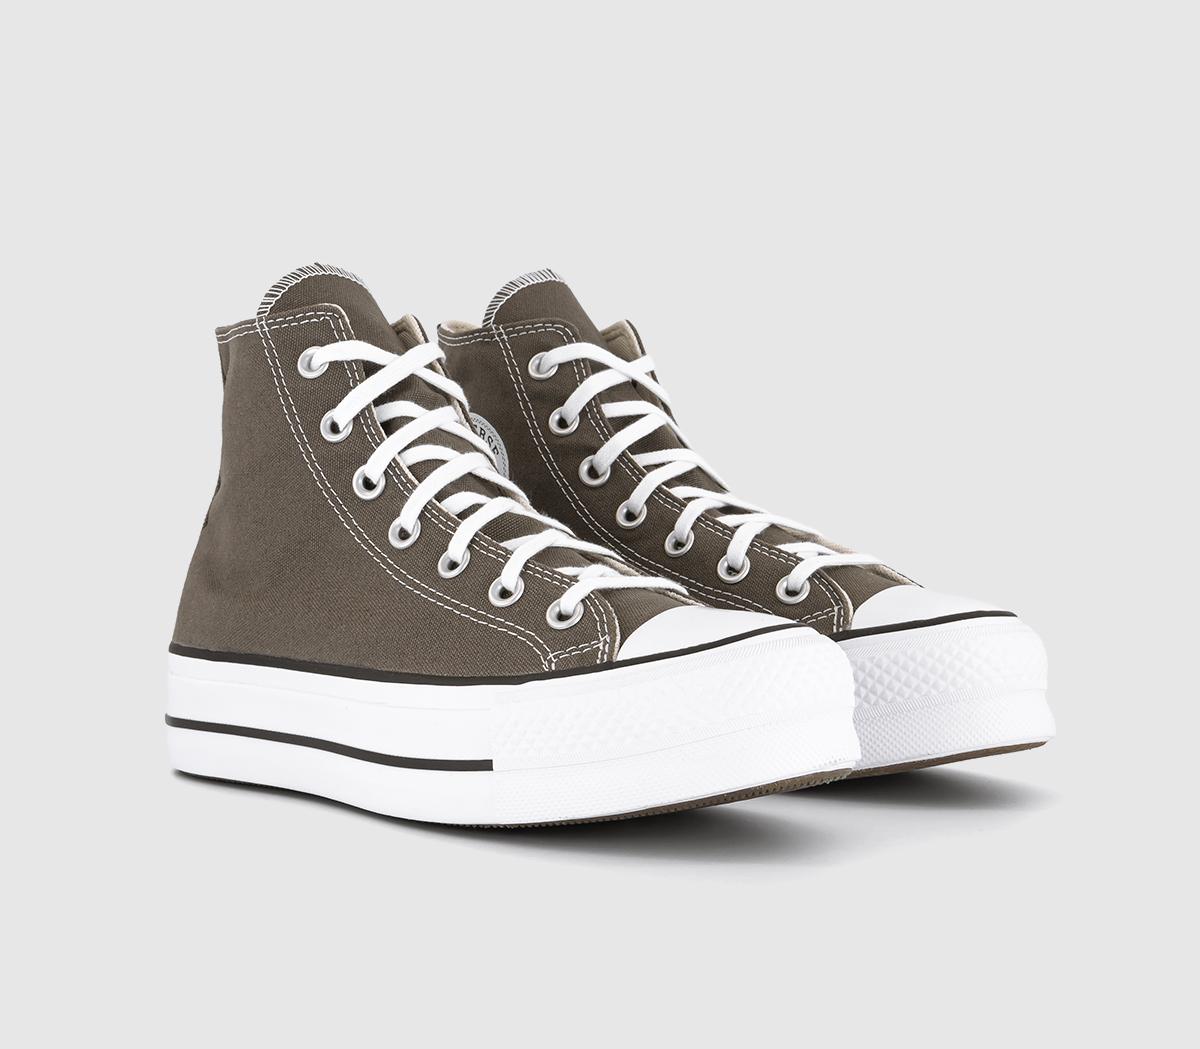 Converse Womens All Star Lift Hi Trainers Charcoal White Black, 8